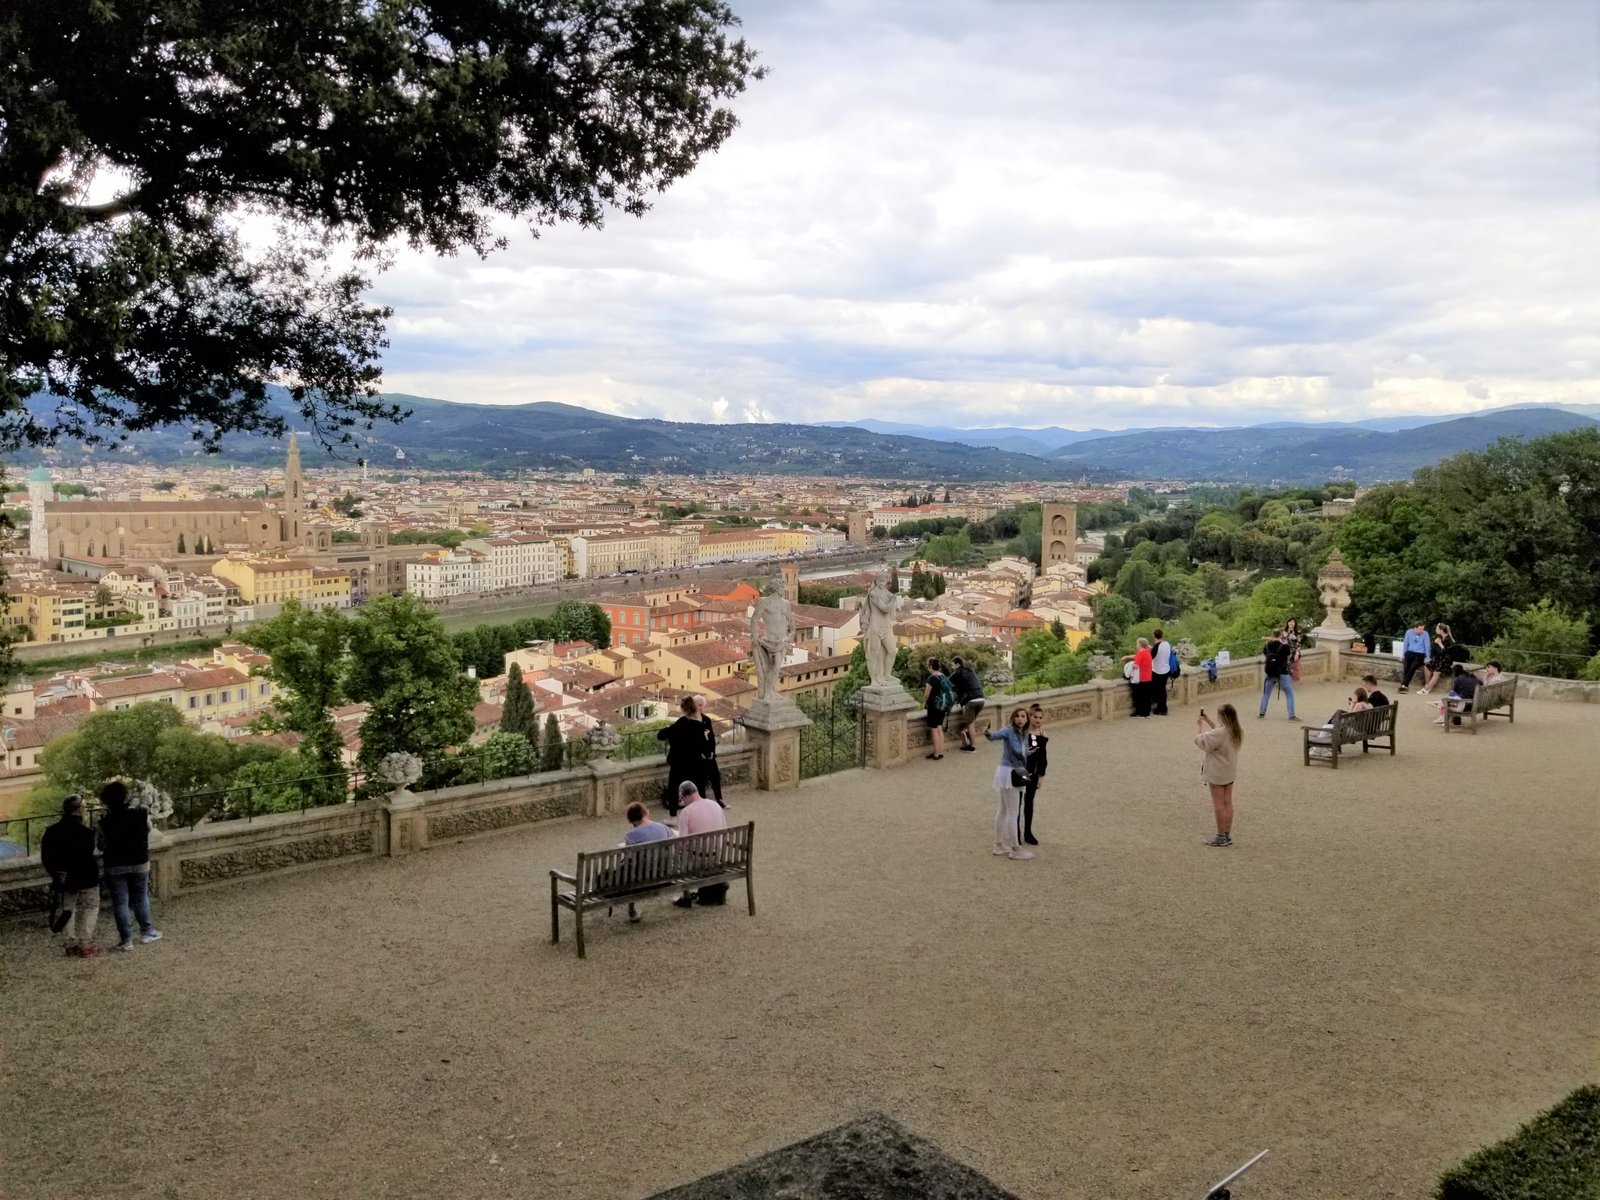 The Bardini Garden in Florence, Italy is a hidden gem with beautiful panoramic views of the city. ouritalianjourney.com; https://ouritalianjourney.com/the-bardini-garden-panoramic-views-of-florence